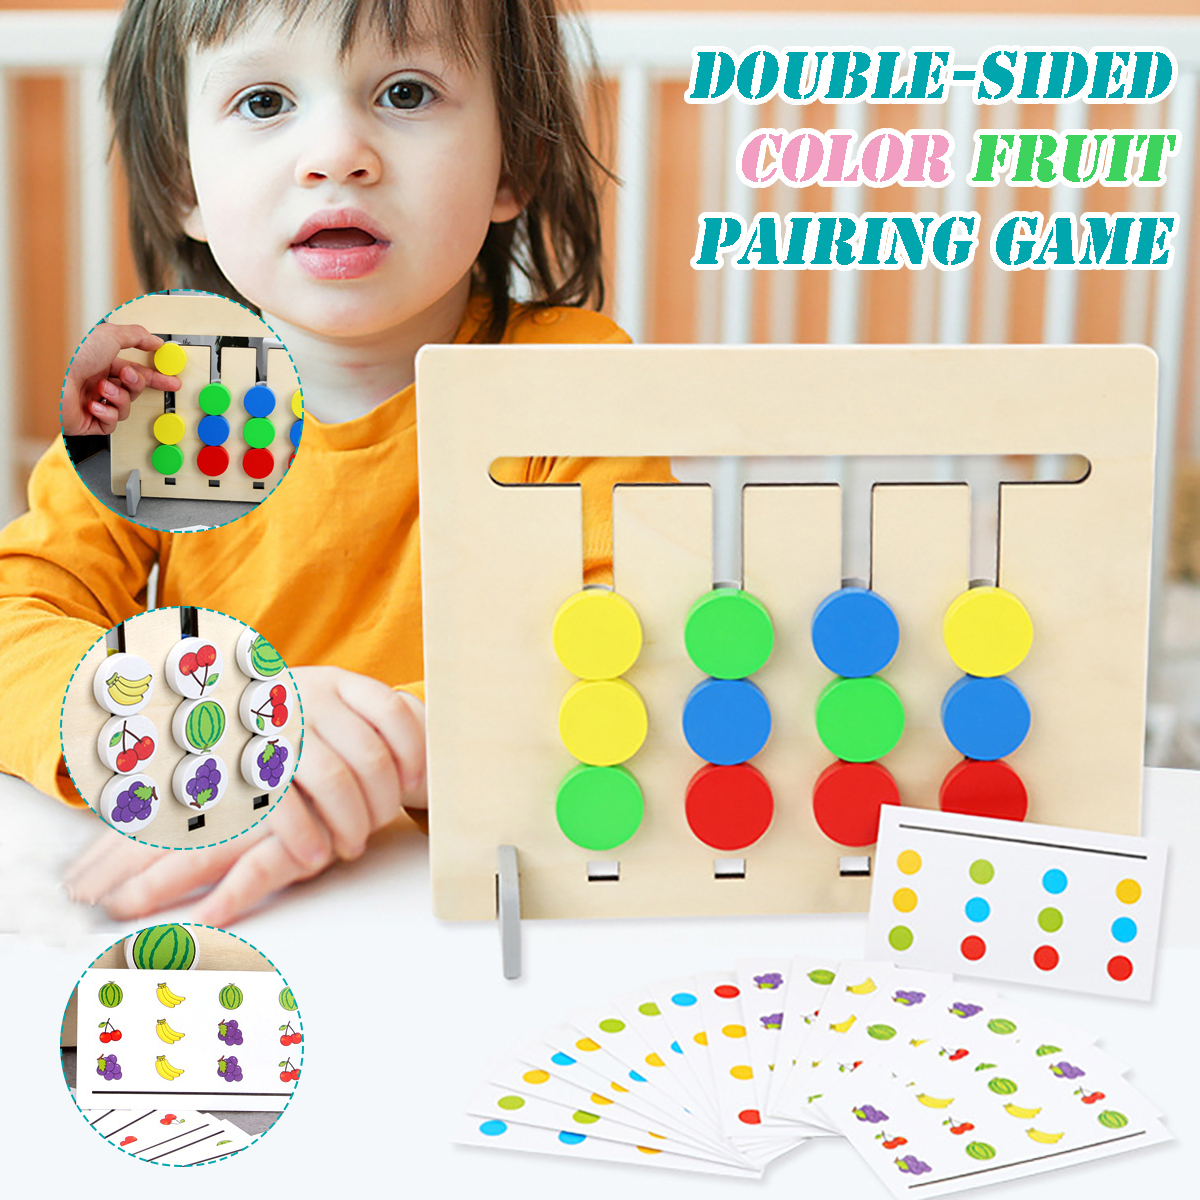 Funny-Double-sided-Color-Fruit-Matching-Game-Children-Wooden-Montessori-Toys-Logical-Reasoning-Train-1674710-1